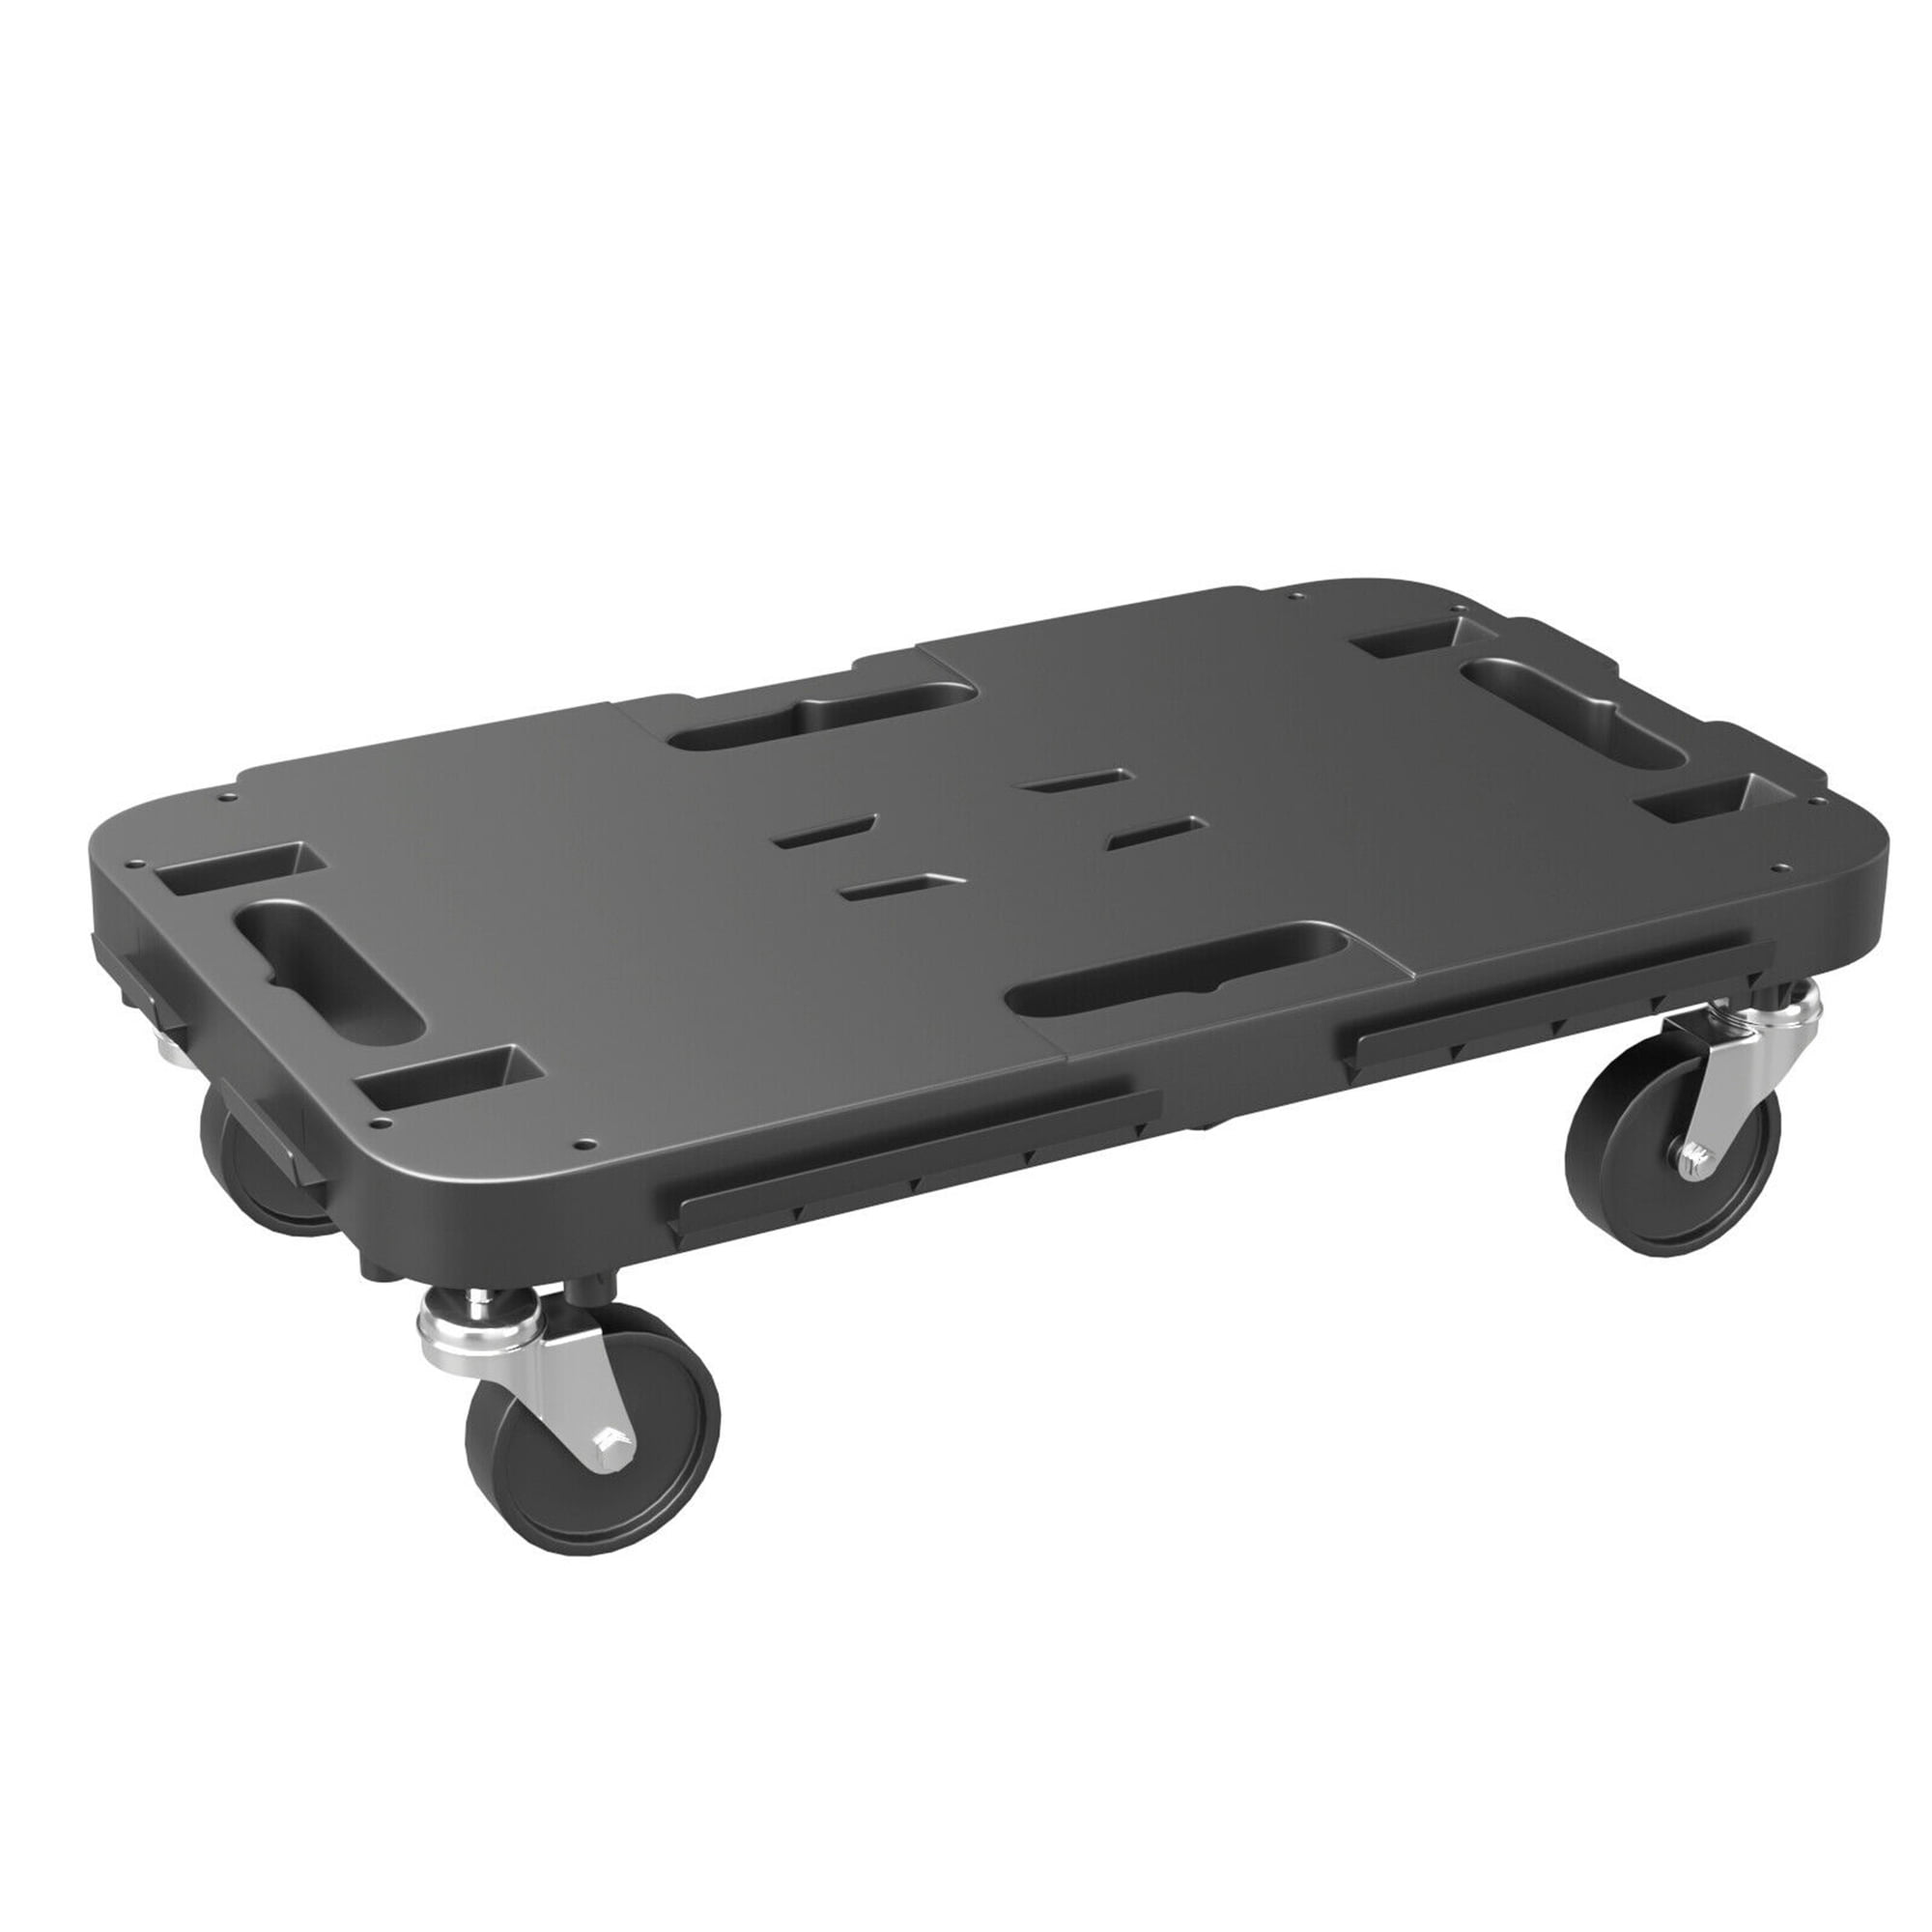 Move-It 3366 23-Inch x 19-Inch Rectangle Wood Platform Dolly 400-lb Load Rating 